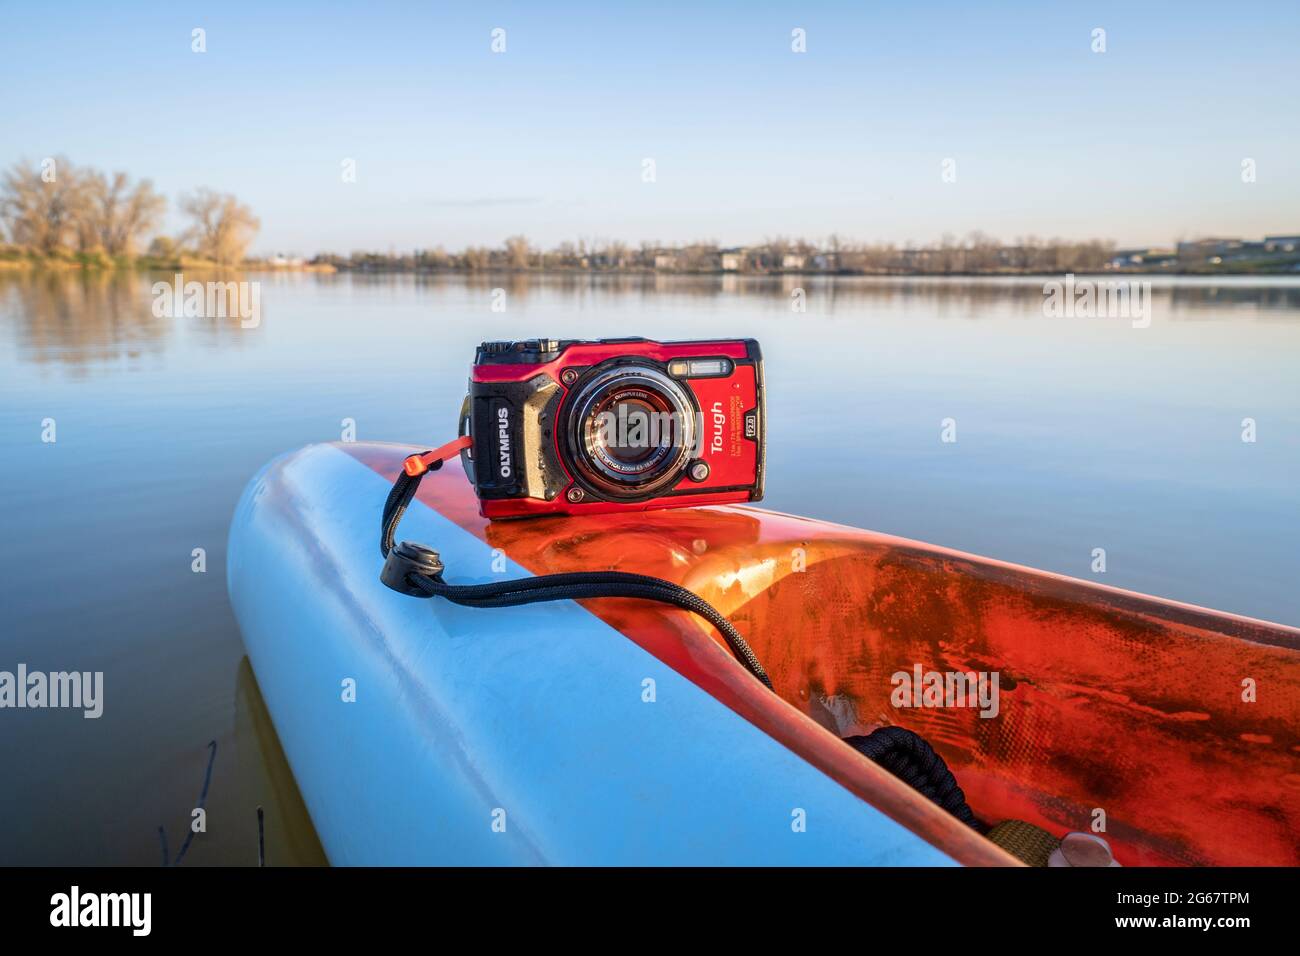 Fort Collins, CO, USA - May 6, 2021: Compact, waterproof Olympus Stylus Tough TG-5 camera on a rear deck of a stand up paddleboard by Mistral, early s Stock Photo